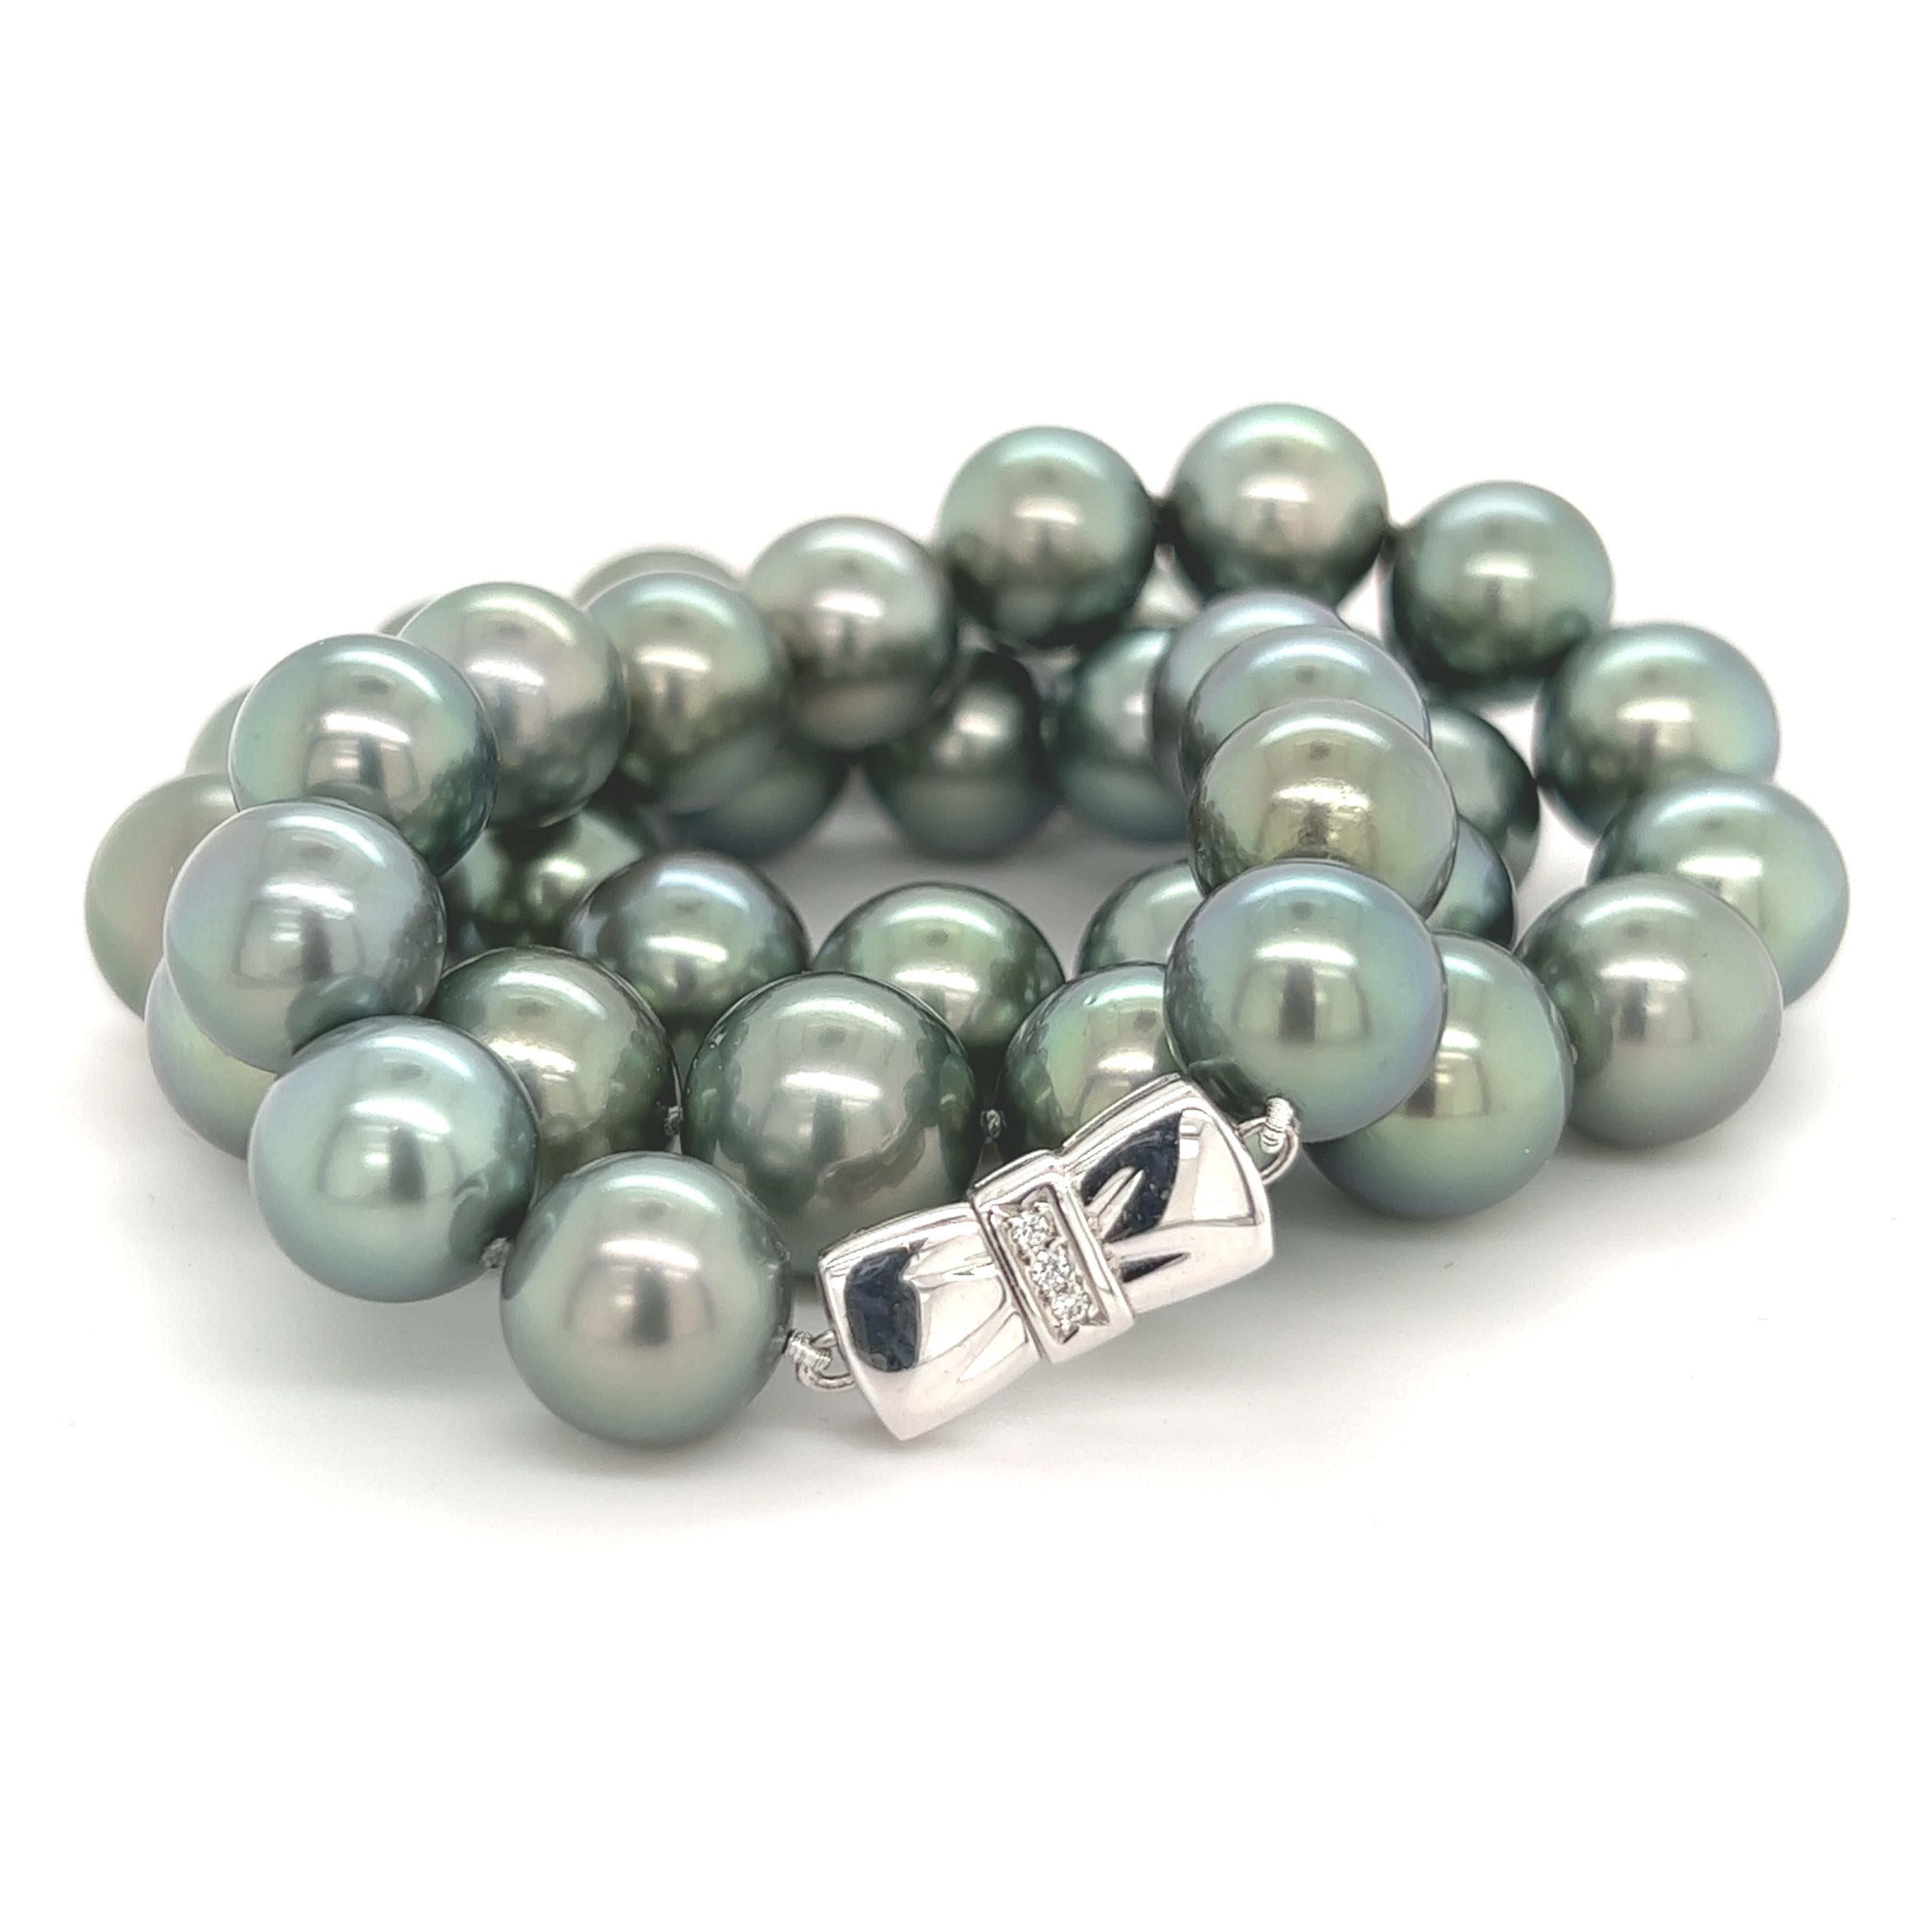 Fine Quality Mikimoto Estate Tahitian Pearl Necklace 18k Gold 11.6 mm Certified $19,750 212091

Nothing says, “I Love you” more than Diamonds and Pearls!

IT WILL COME WITH ITS ORIGINAL MIKIMOTO PACKAGING AS PURCHASED!

This Tahitian pearl necklace